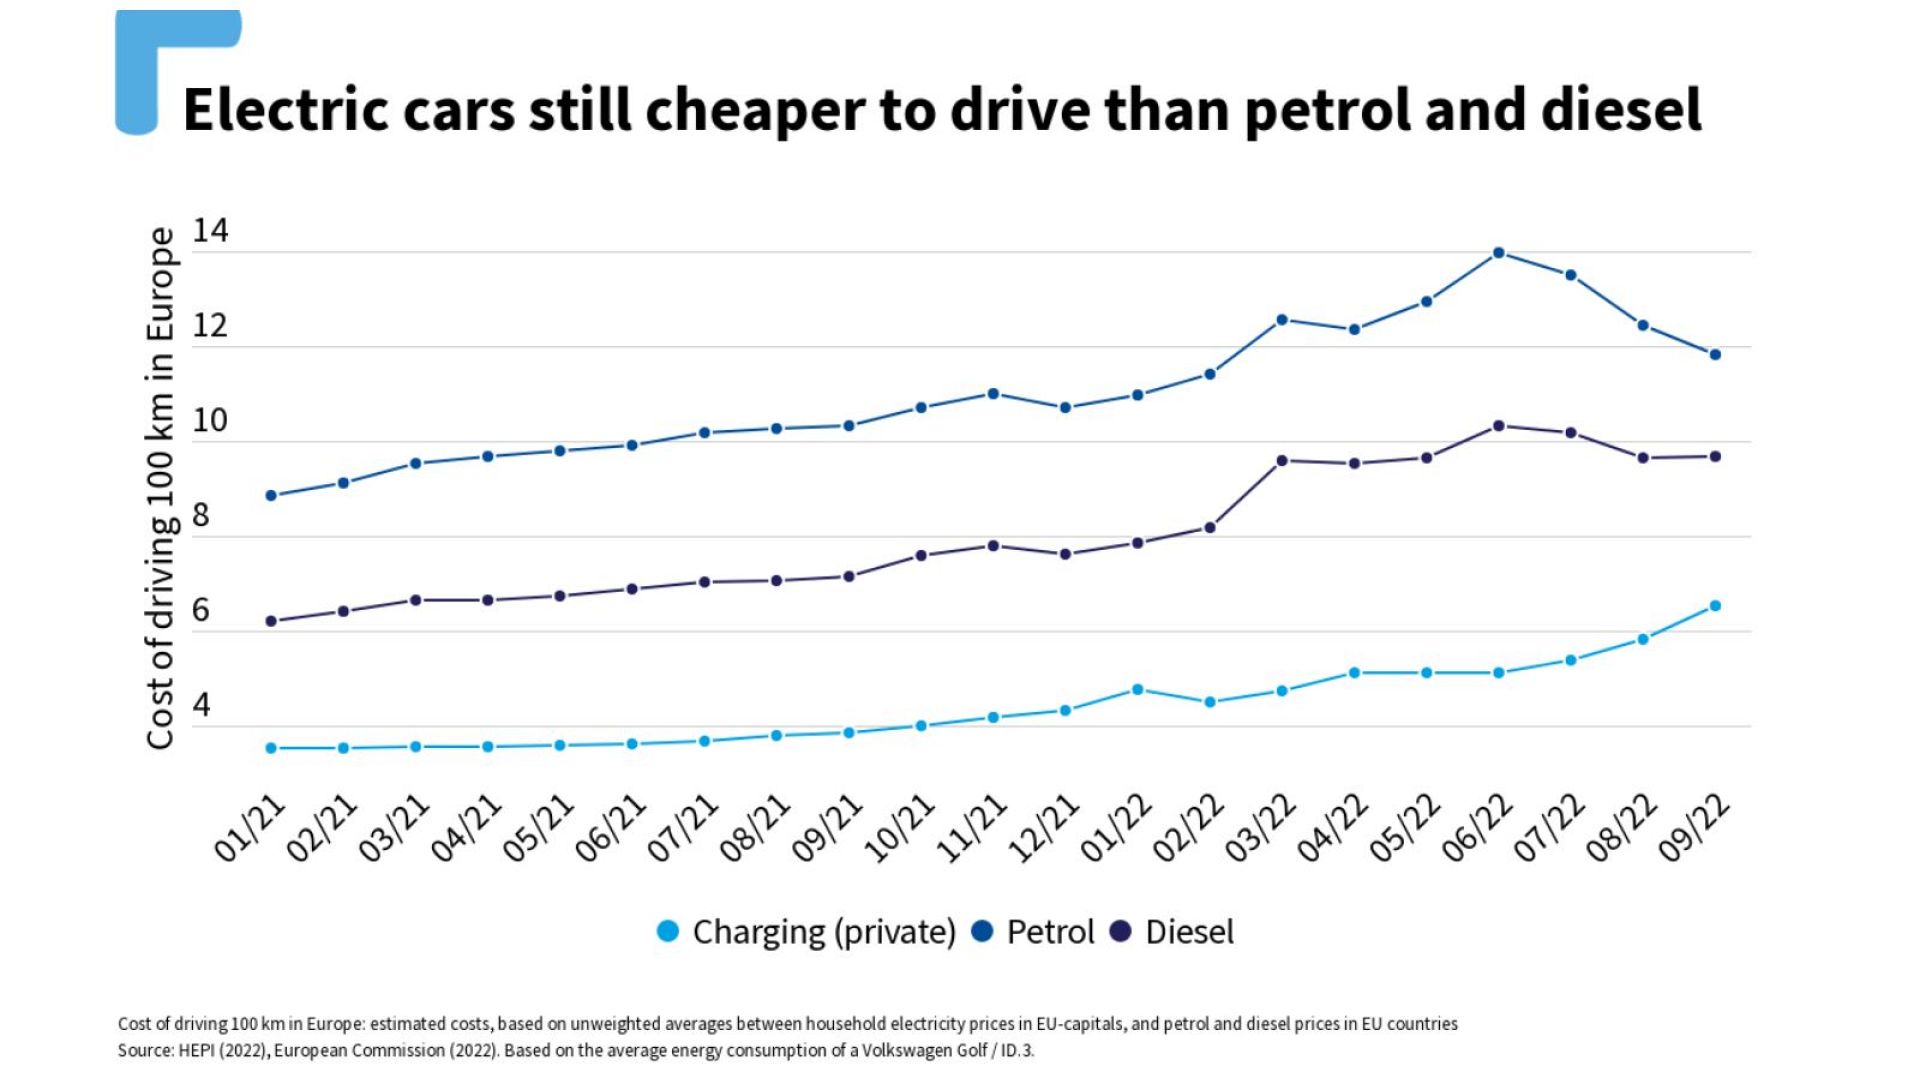 Electric cars are still cheaper to run than petrol and diesel. T&E did